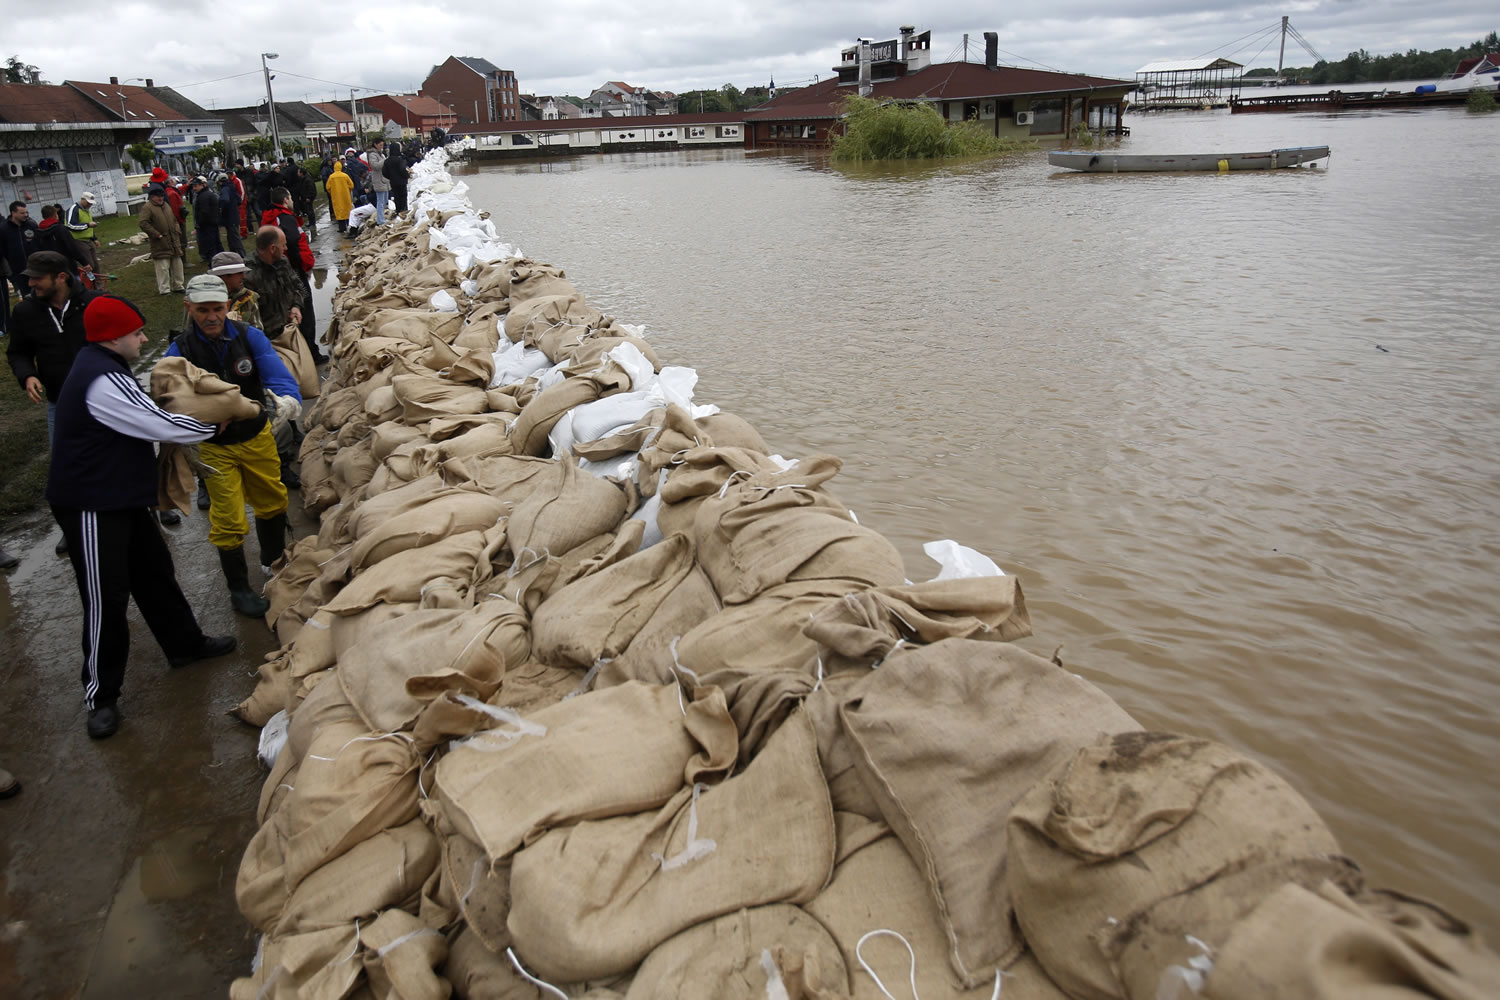 People pile sandbags by the bank of the Sava River on Saturday in Sremska Mitrovica, Serbia.